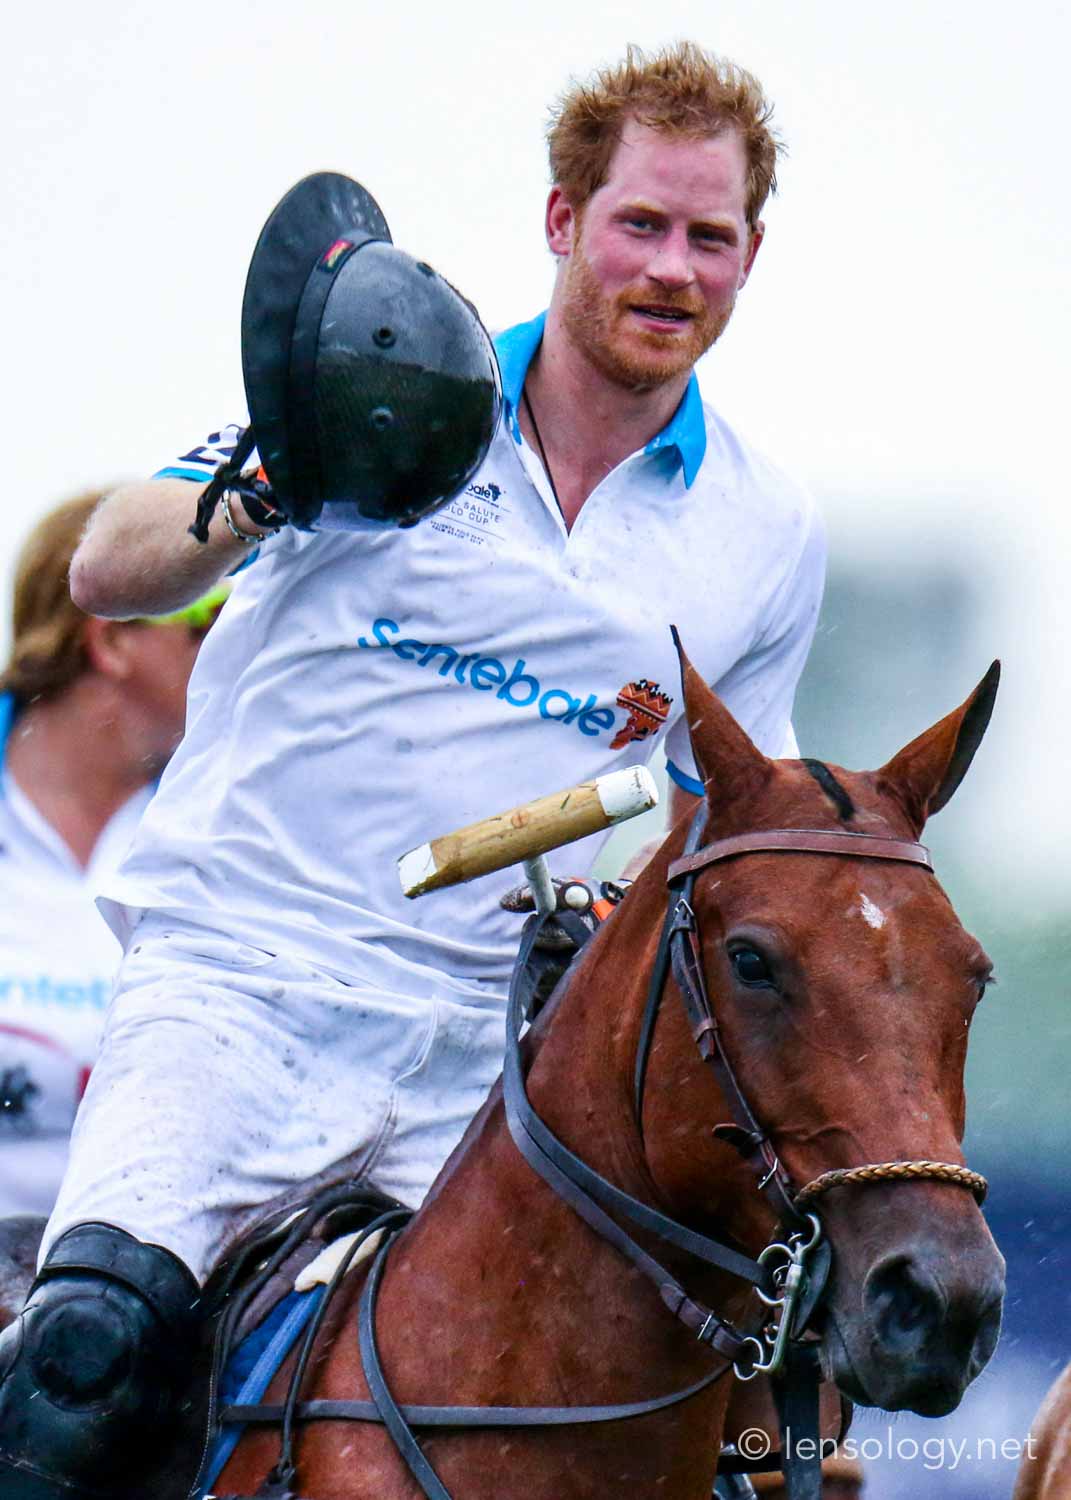 LENSOLOGY.NET - Prince Harry participates at the Sentebale Polo Cup, wellington, FL.
All images are copyright of Lensology.net
Email: info@lensology.net
www.lensology.net